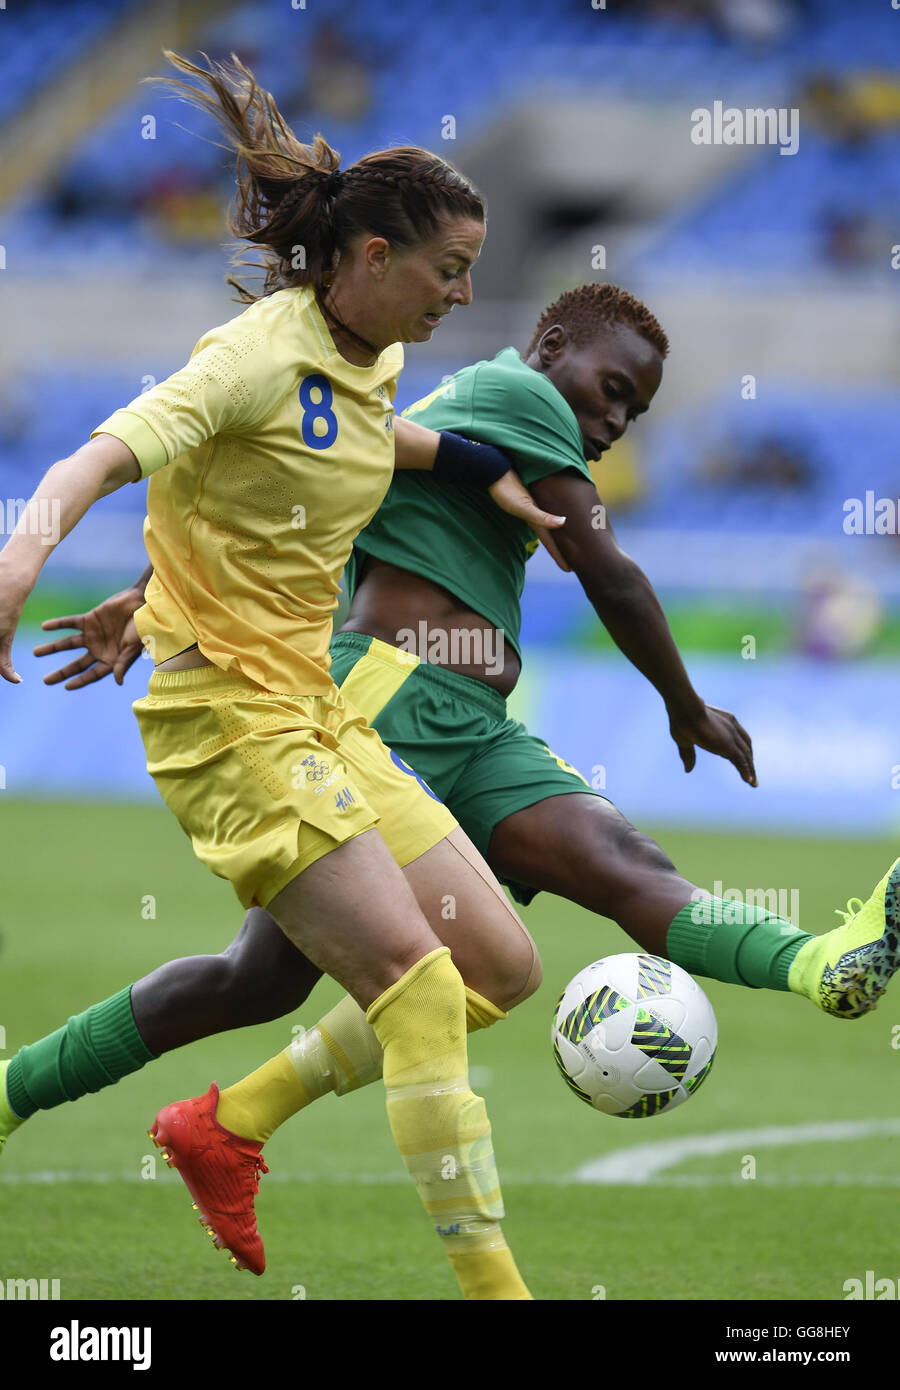 Rio De Janeiro, Brazil. 3rd Aug, 2016. Schelin Lotta of Sweden (L) competes during the opening match of the women's Olympic football competitions between South Africa and Sweden at the Olympic Stadium in Rio de Janeiro, Brazil, Aug. 3, 2016. Sweden won 1-0. © Qi Heng/Xinhua/Alamy Live News Stock Photo